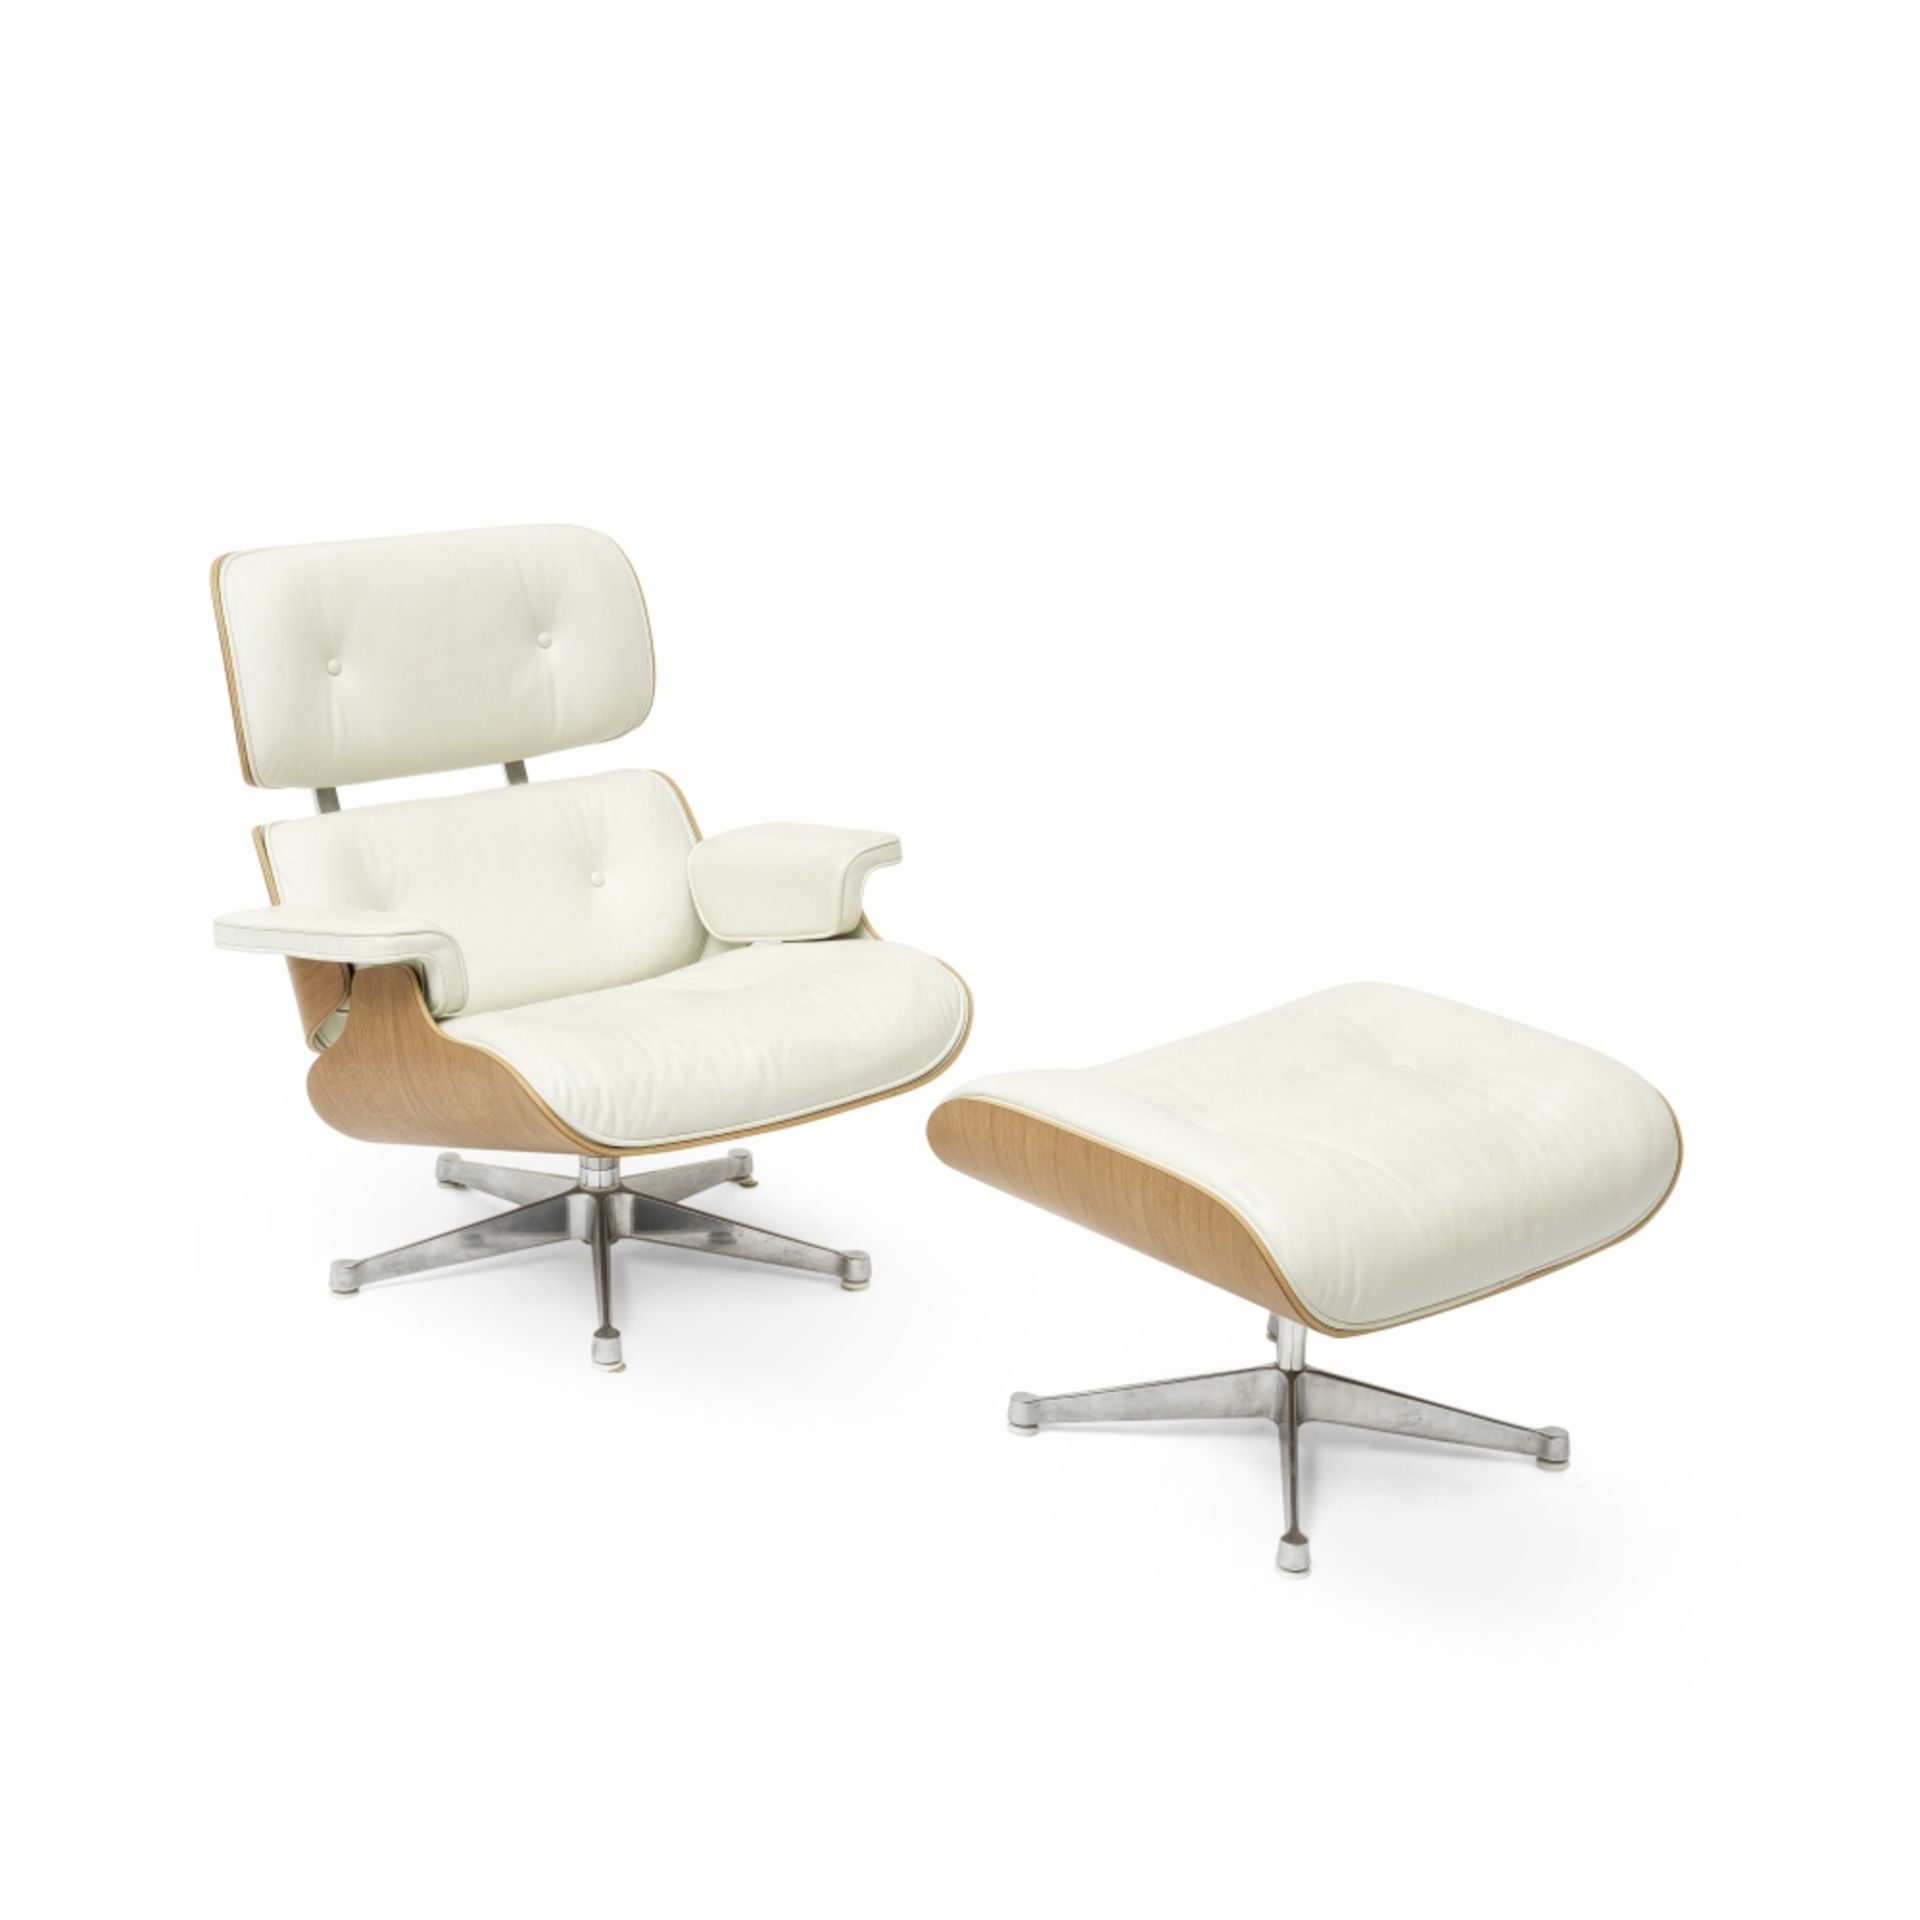 A white leather and walnut Eames Lounge Chair and Ottoman Made by Vitra, from The Conran Shop (2)